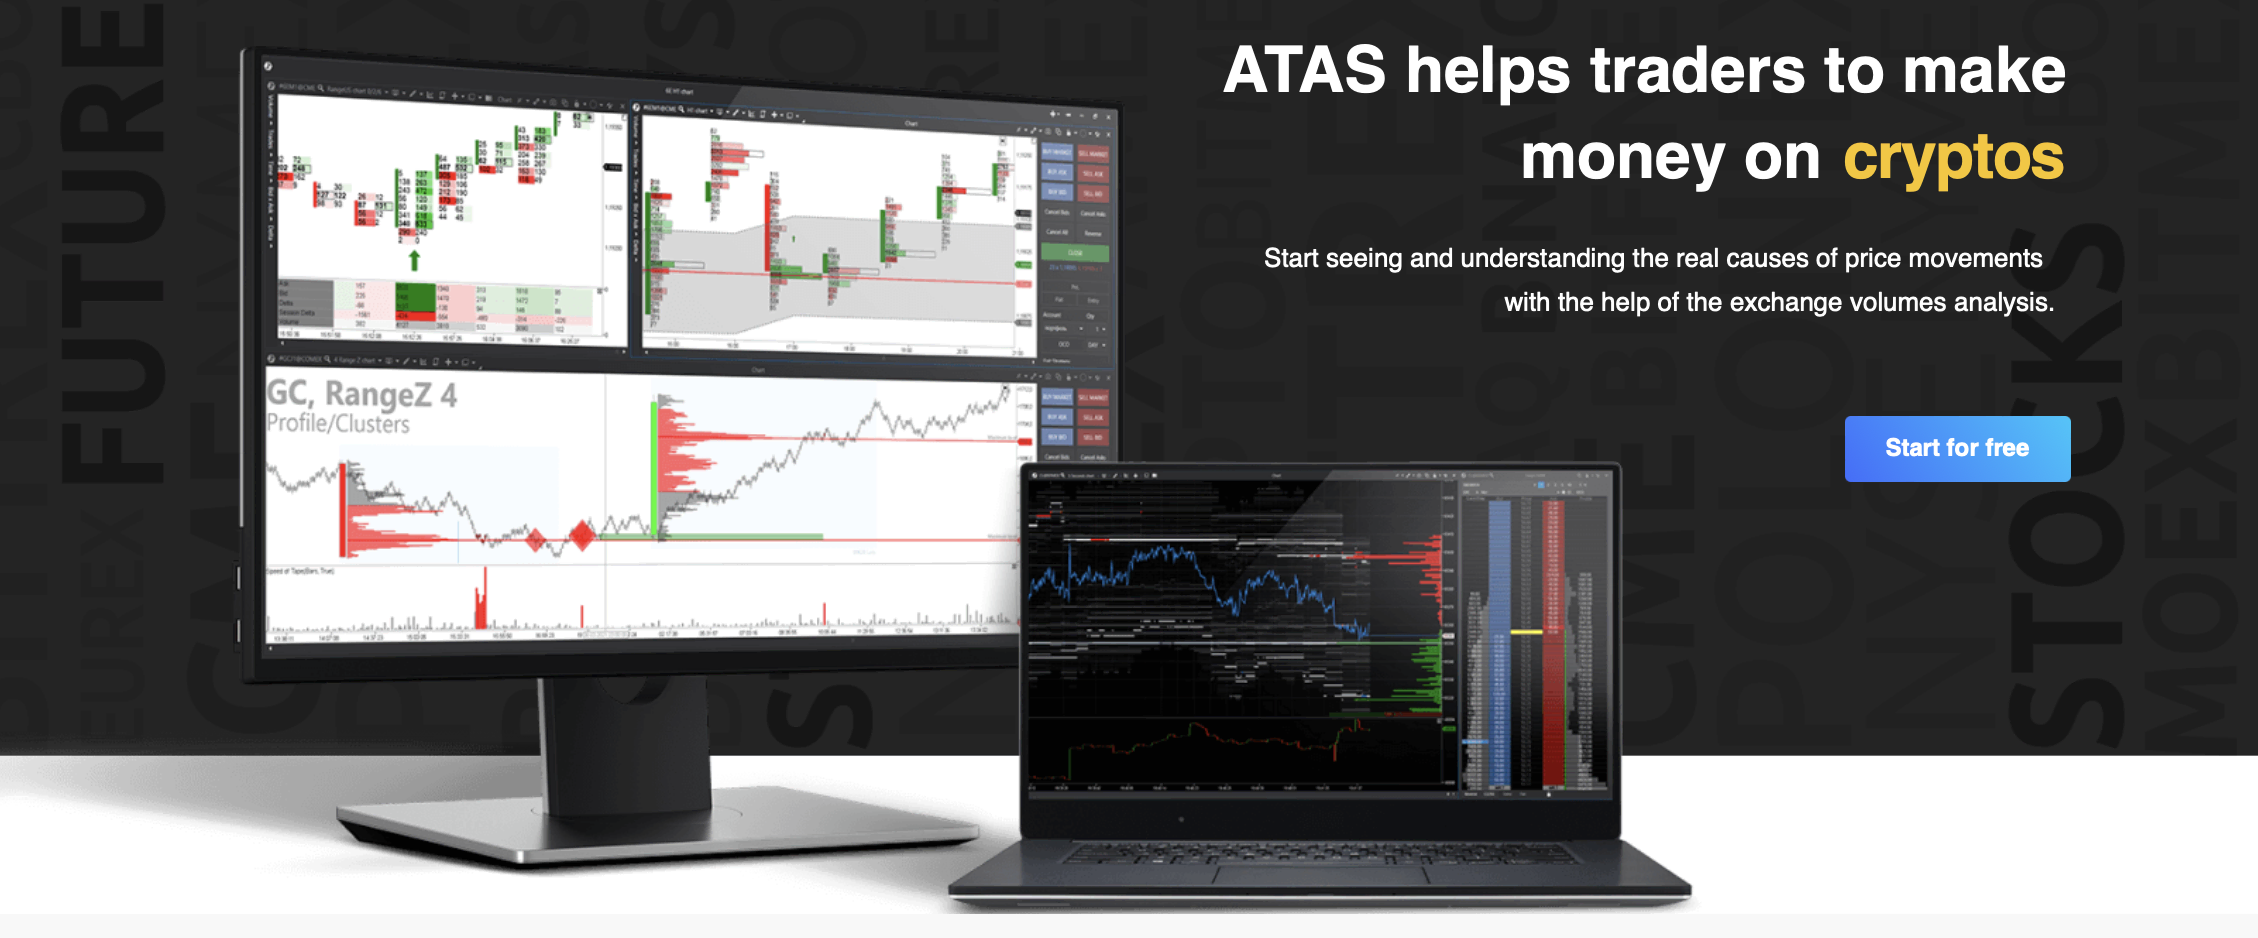 The official website of the ATAS trading platform